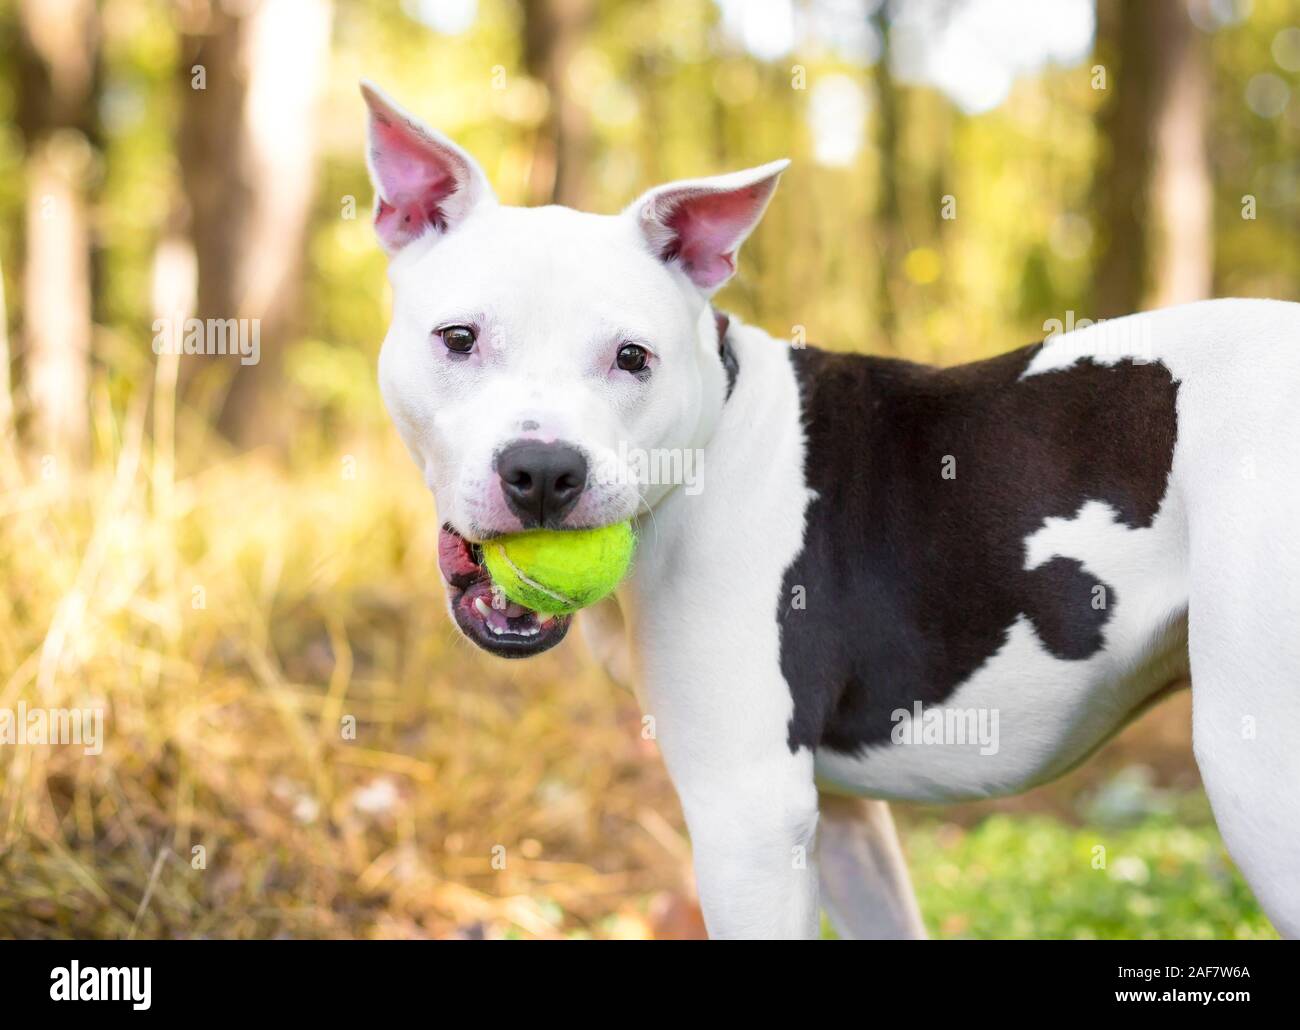 A white Pit Bull Terrier mixed breed dog with brown spots holding a ball in its mouth Stock Photo